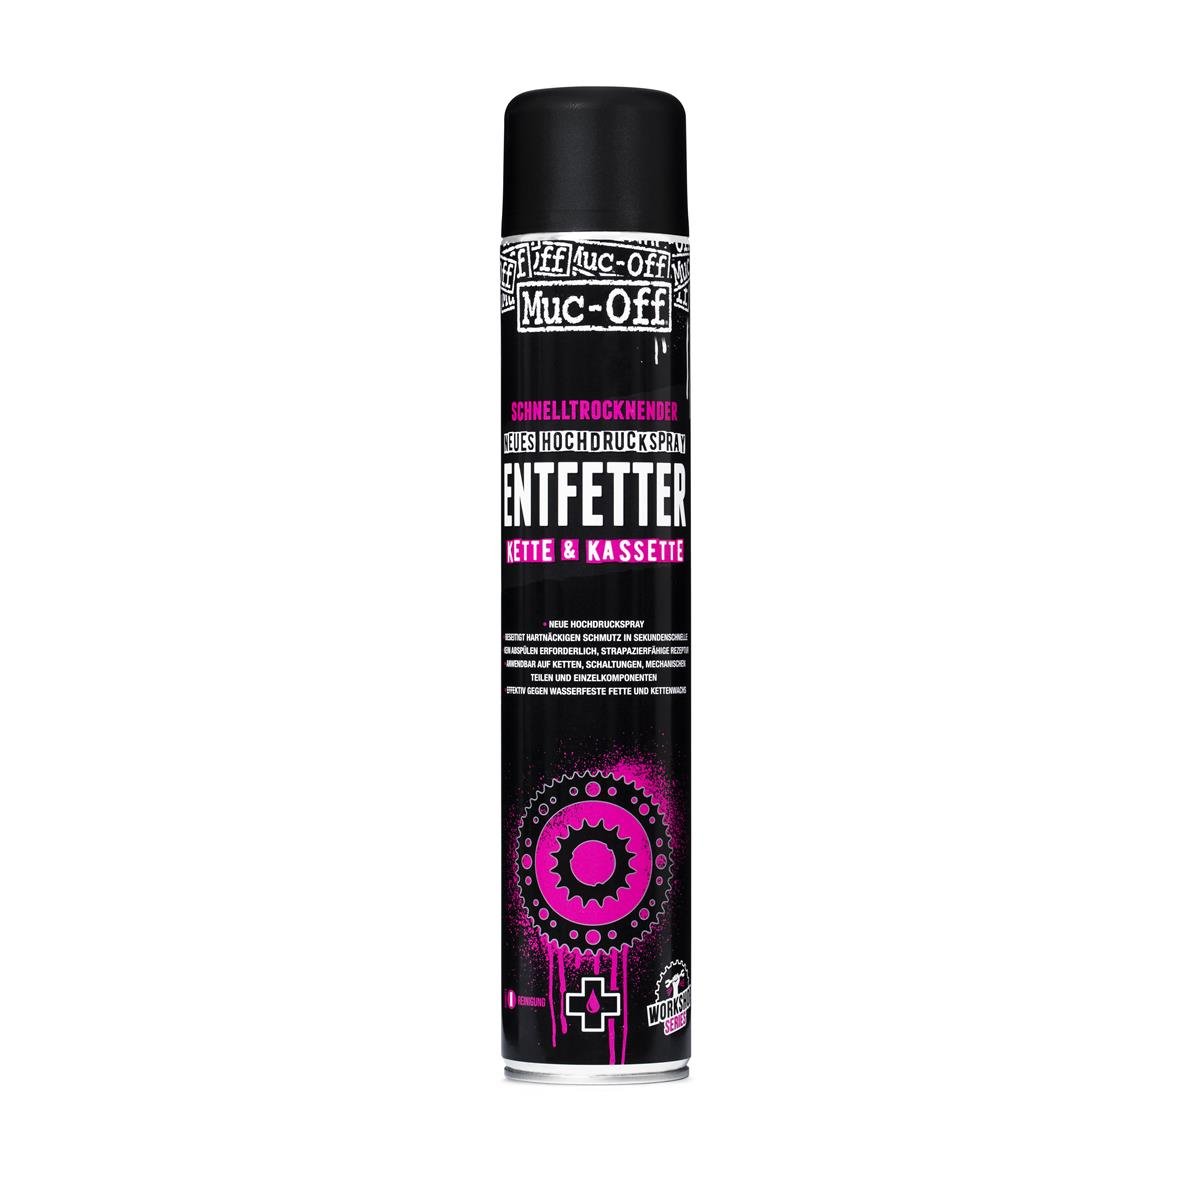 Muc-Off Entfetter High Pressure Quick Drying De-Greaser 750 ml